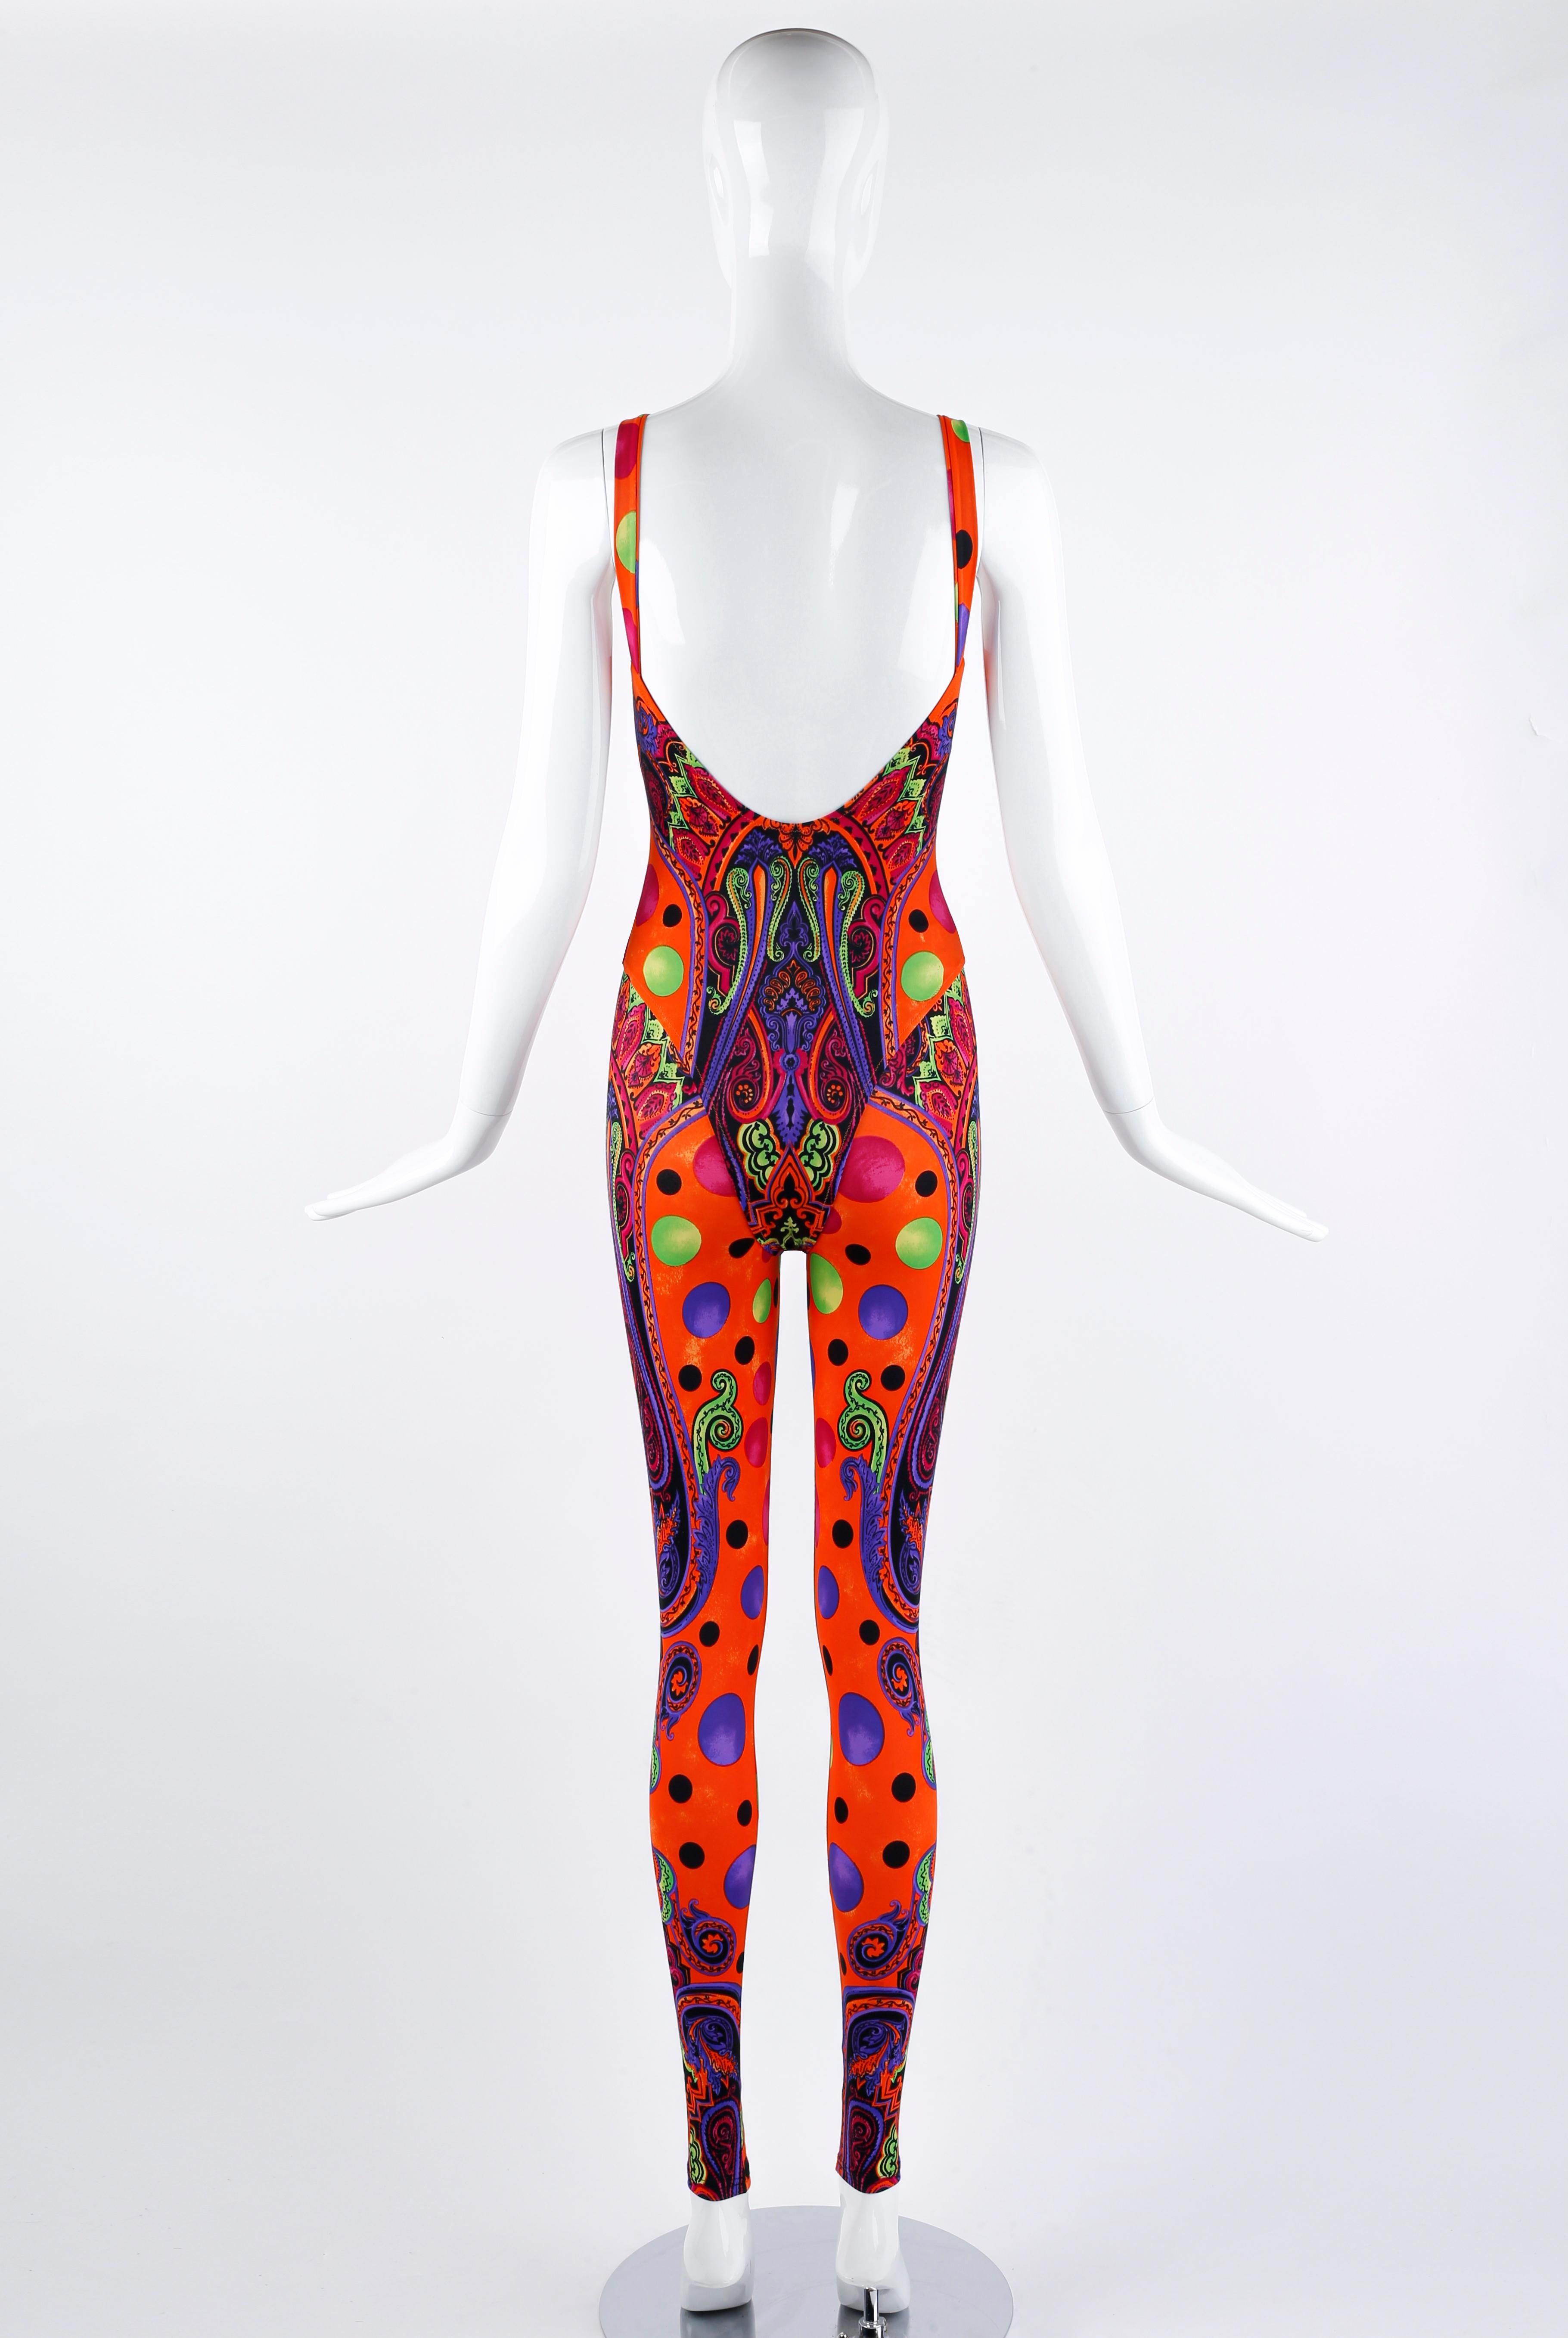 Gianni Versace S/S 1991 Pop Art Baroque Print Swimsuit Bodysuit & Leggings Set In Good Condition For Sale In Chicago, IL